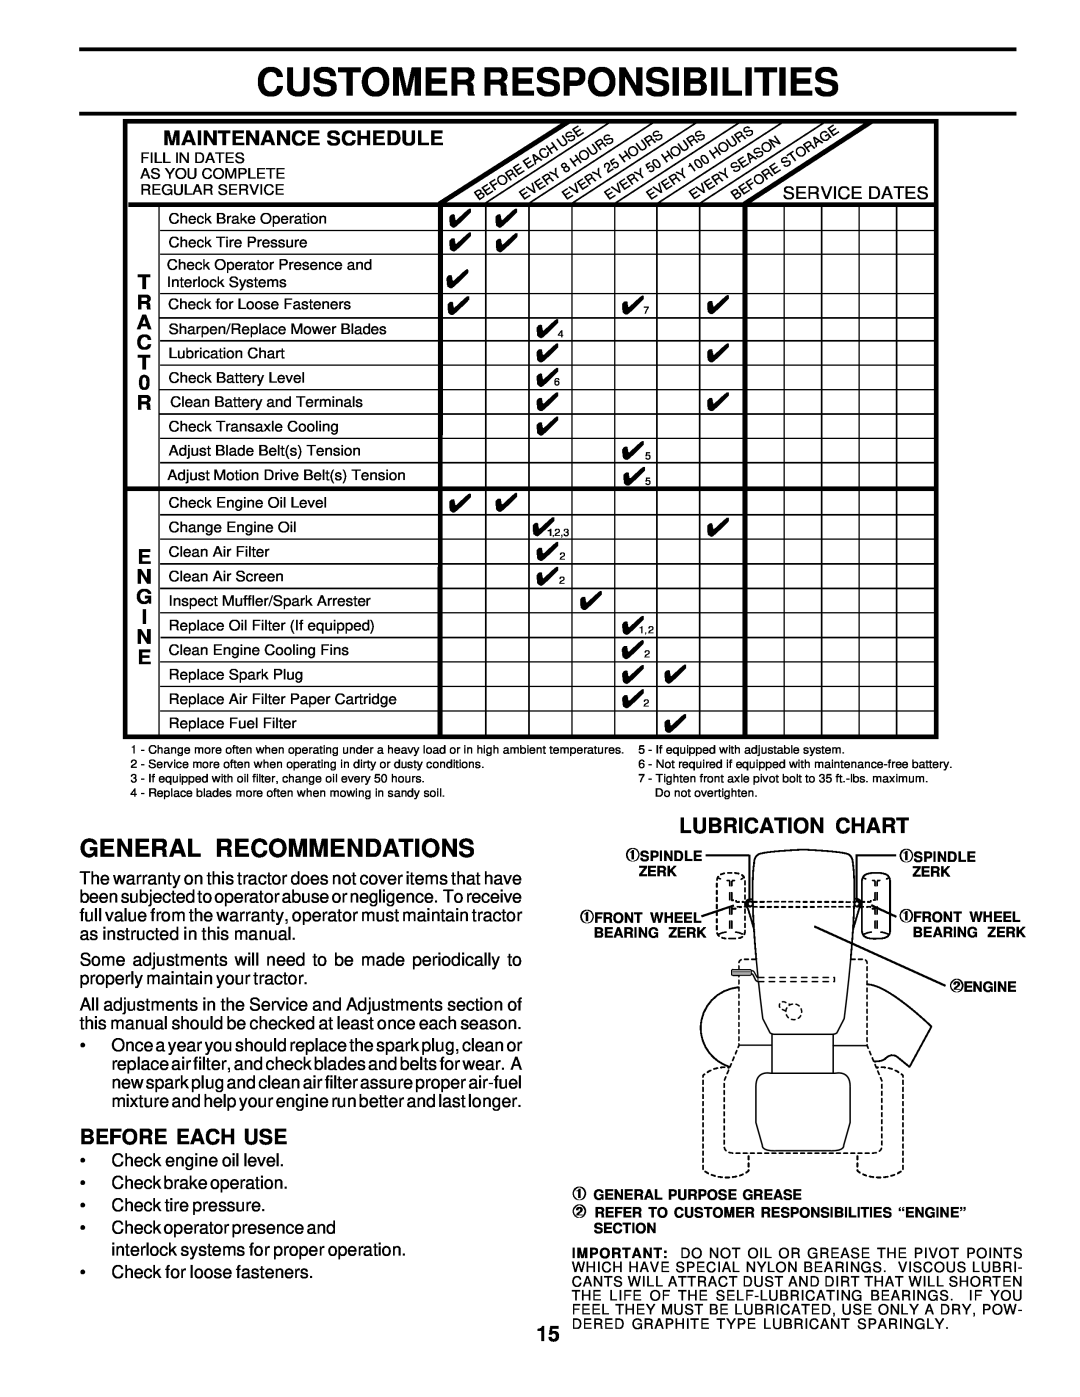 Weed Eater 177019 manual Customer Responsibilities, General Recommendations, ¿ Lubrication Chart, Before Each Use 